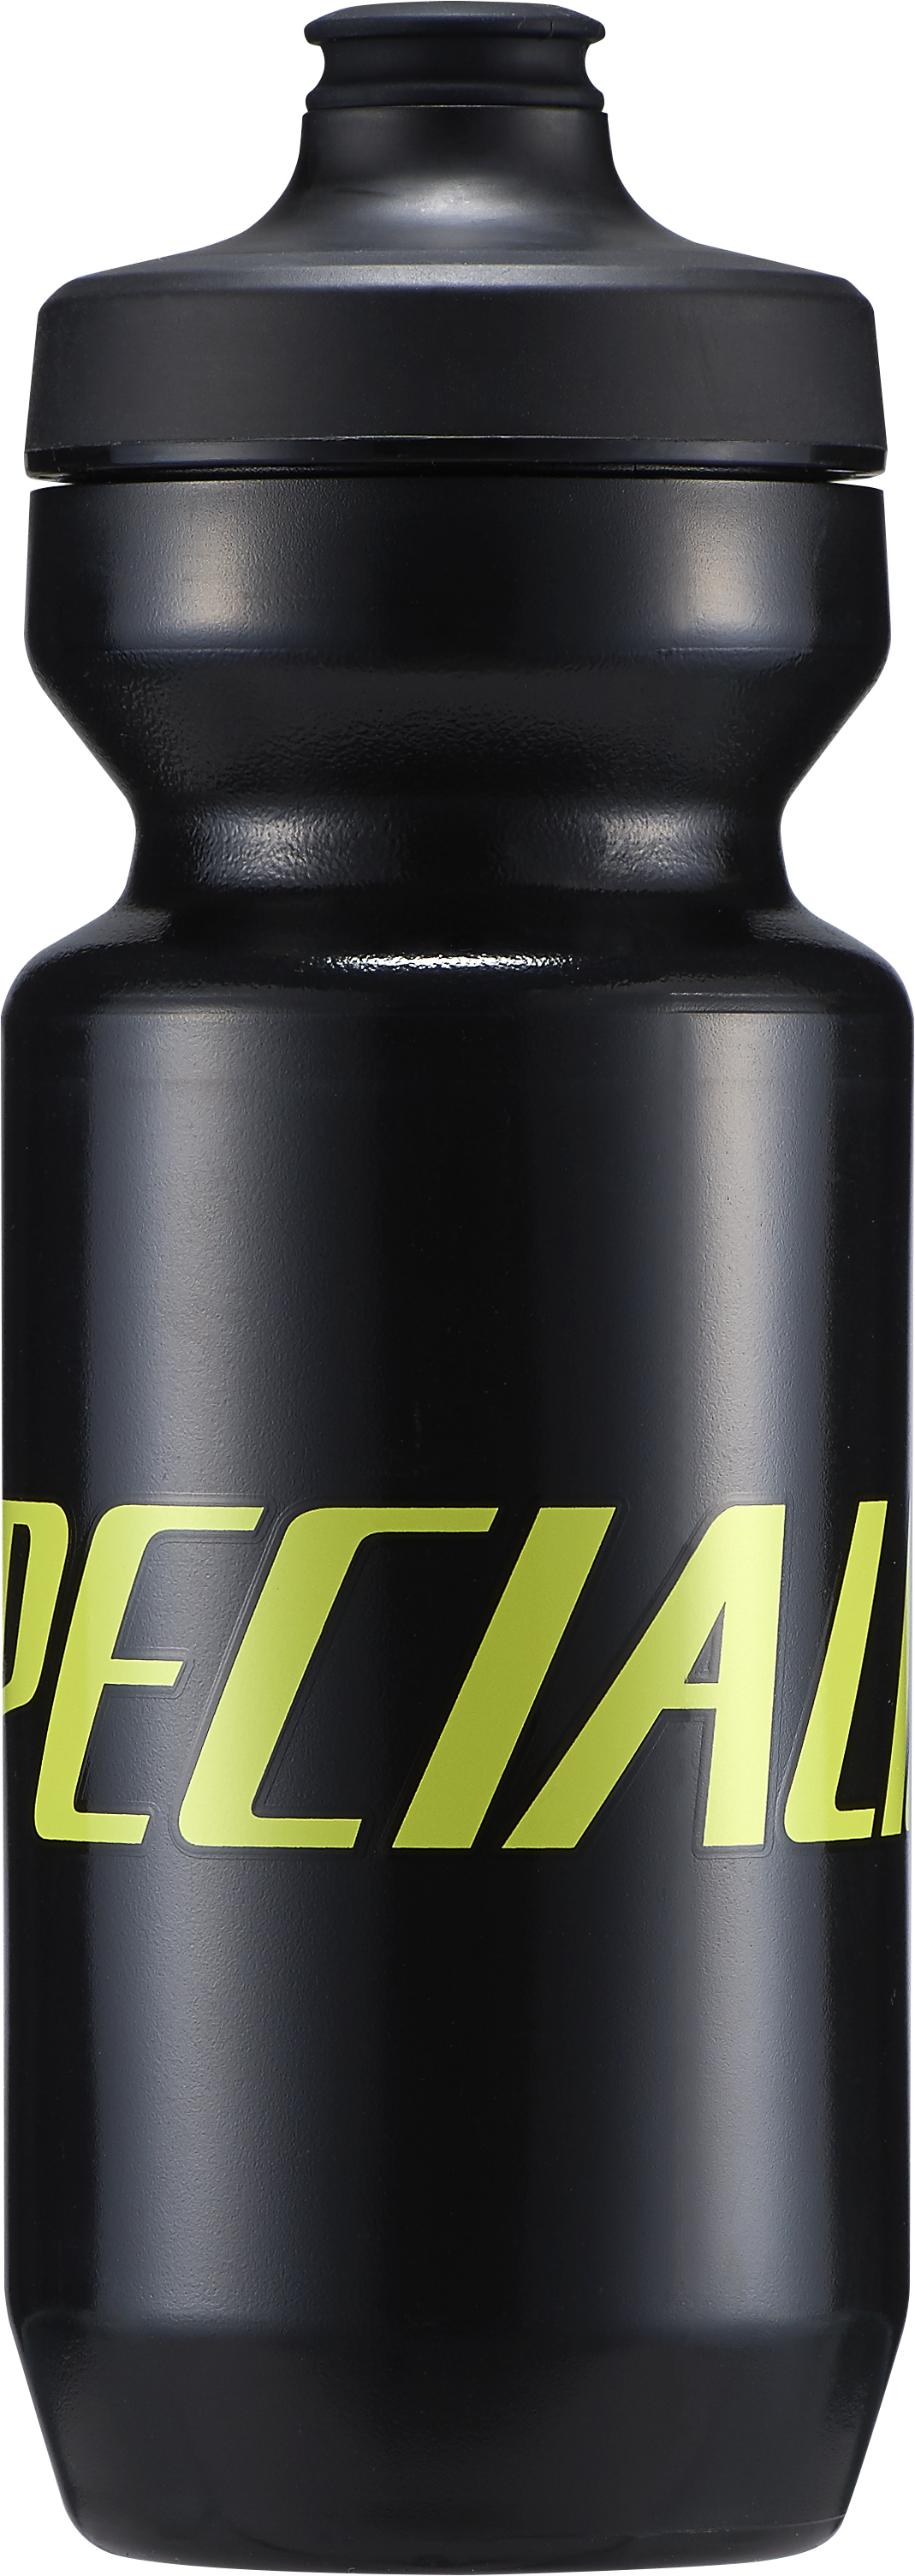 Specialized Special Eyes Purist MoFlo "Limited Edition" 650ml Drikkedunk - Sort/Gul